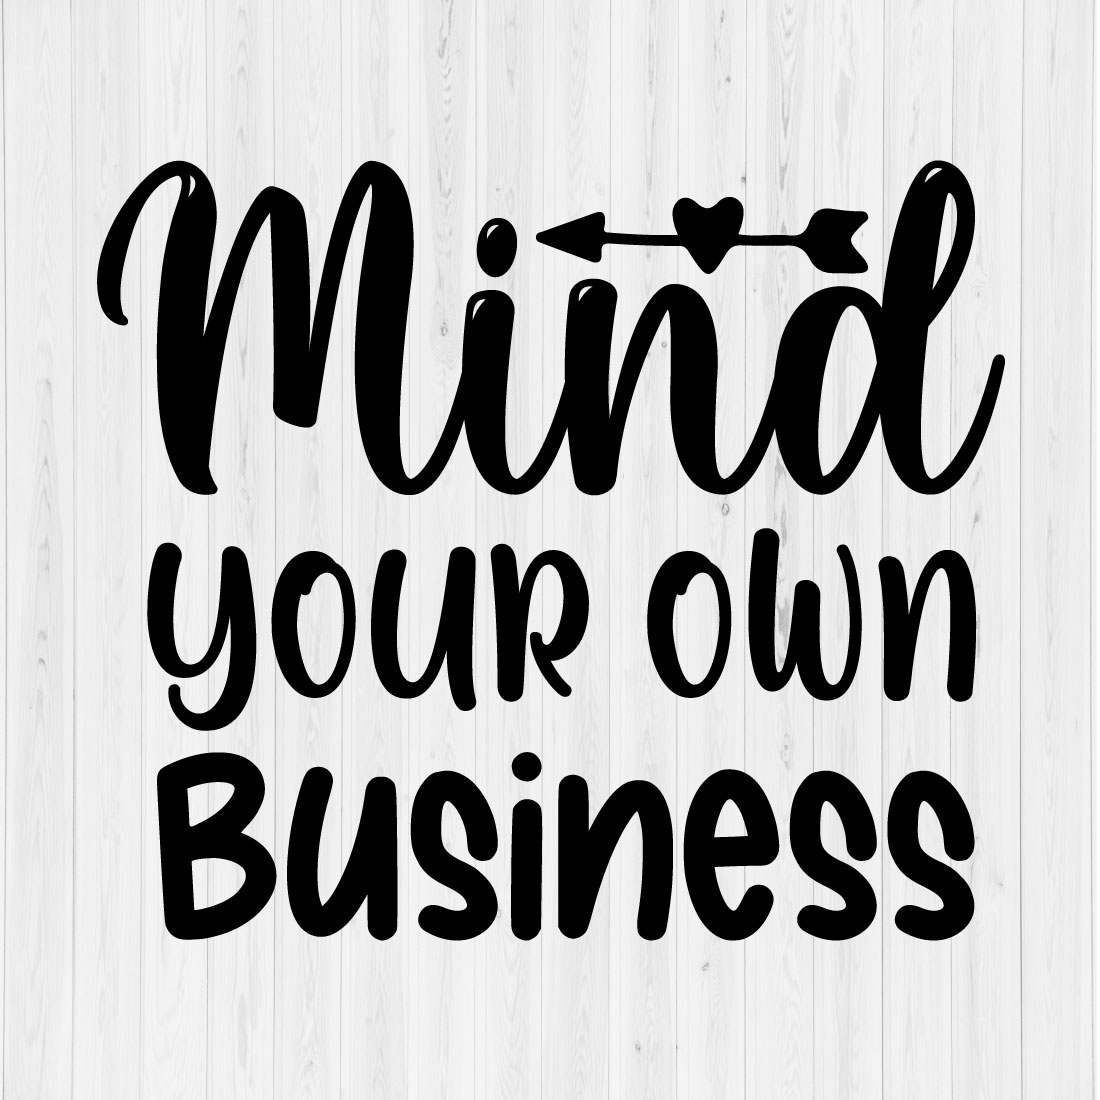 Mind your own Business preview image.